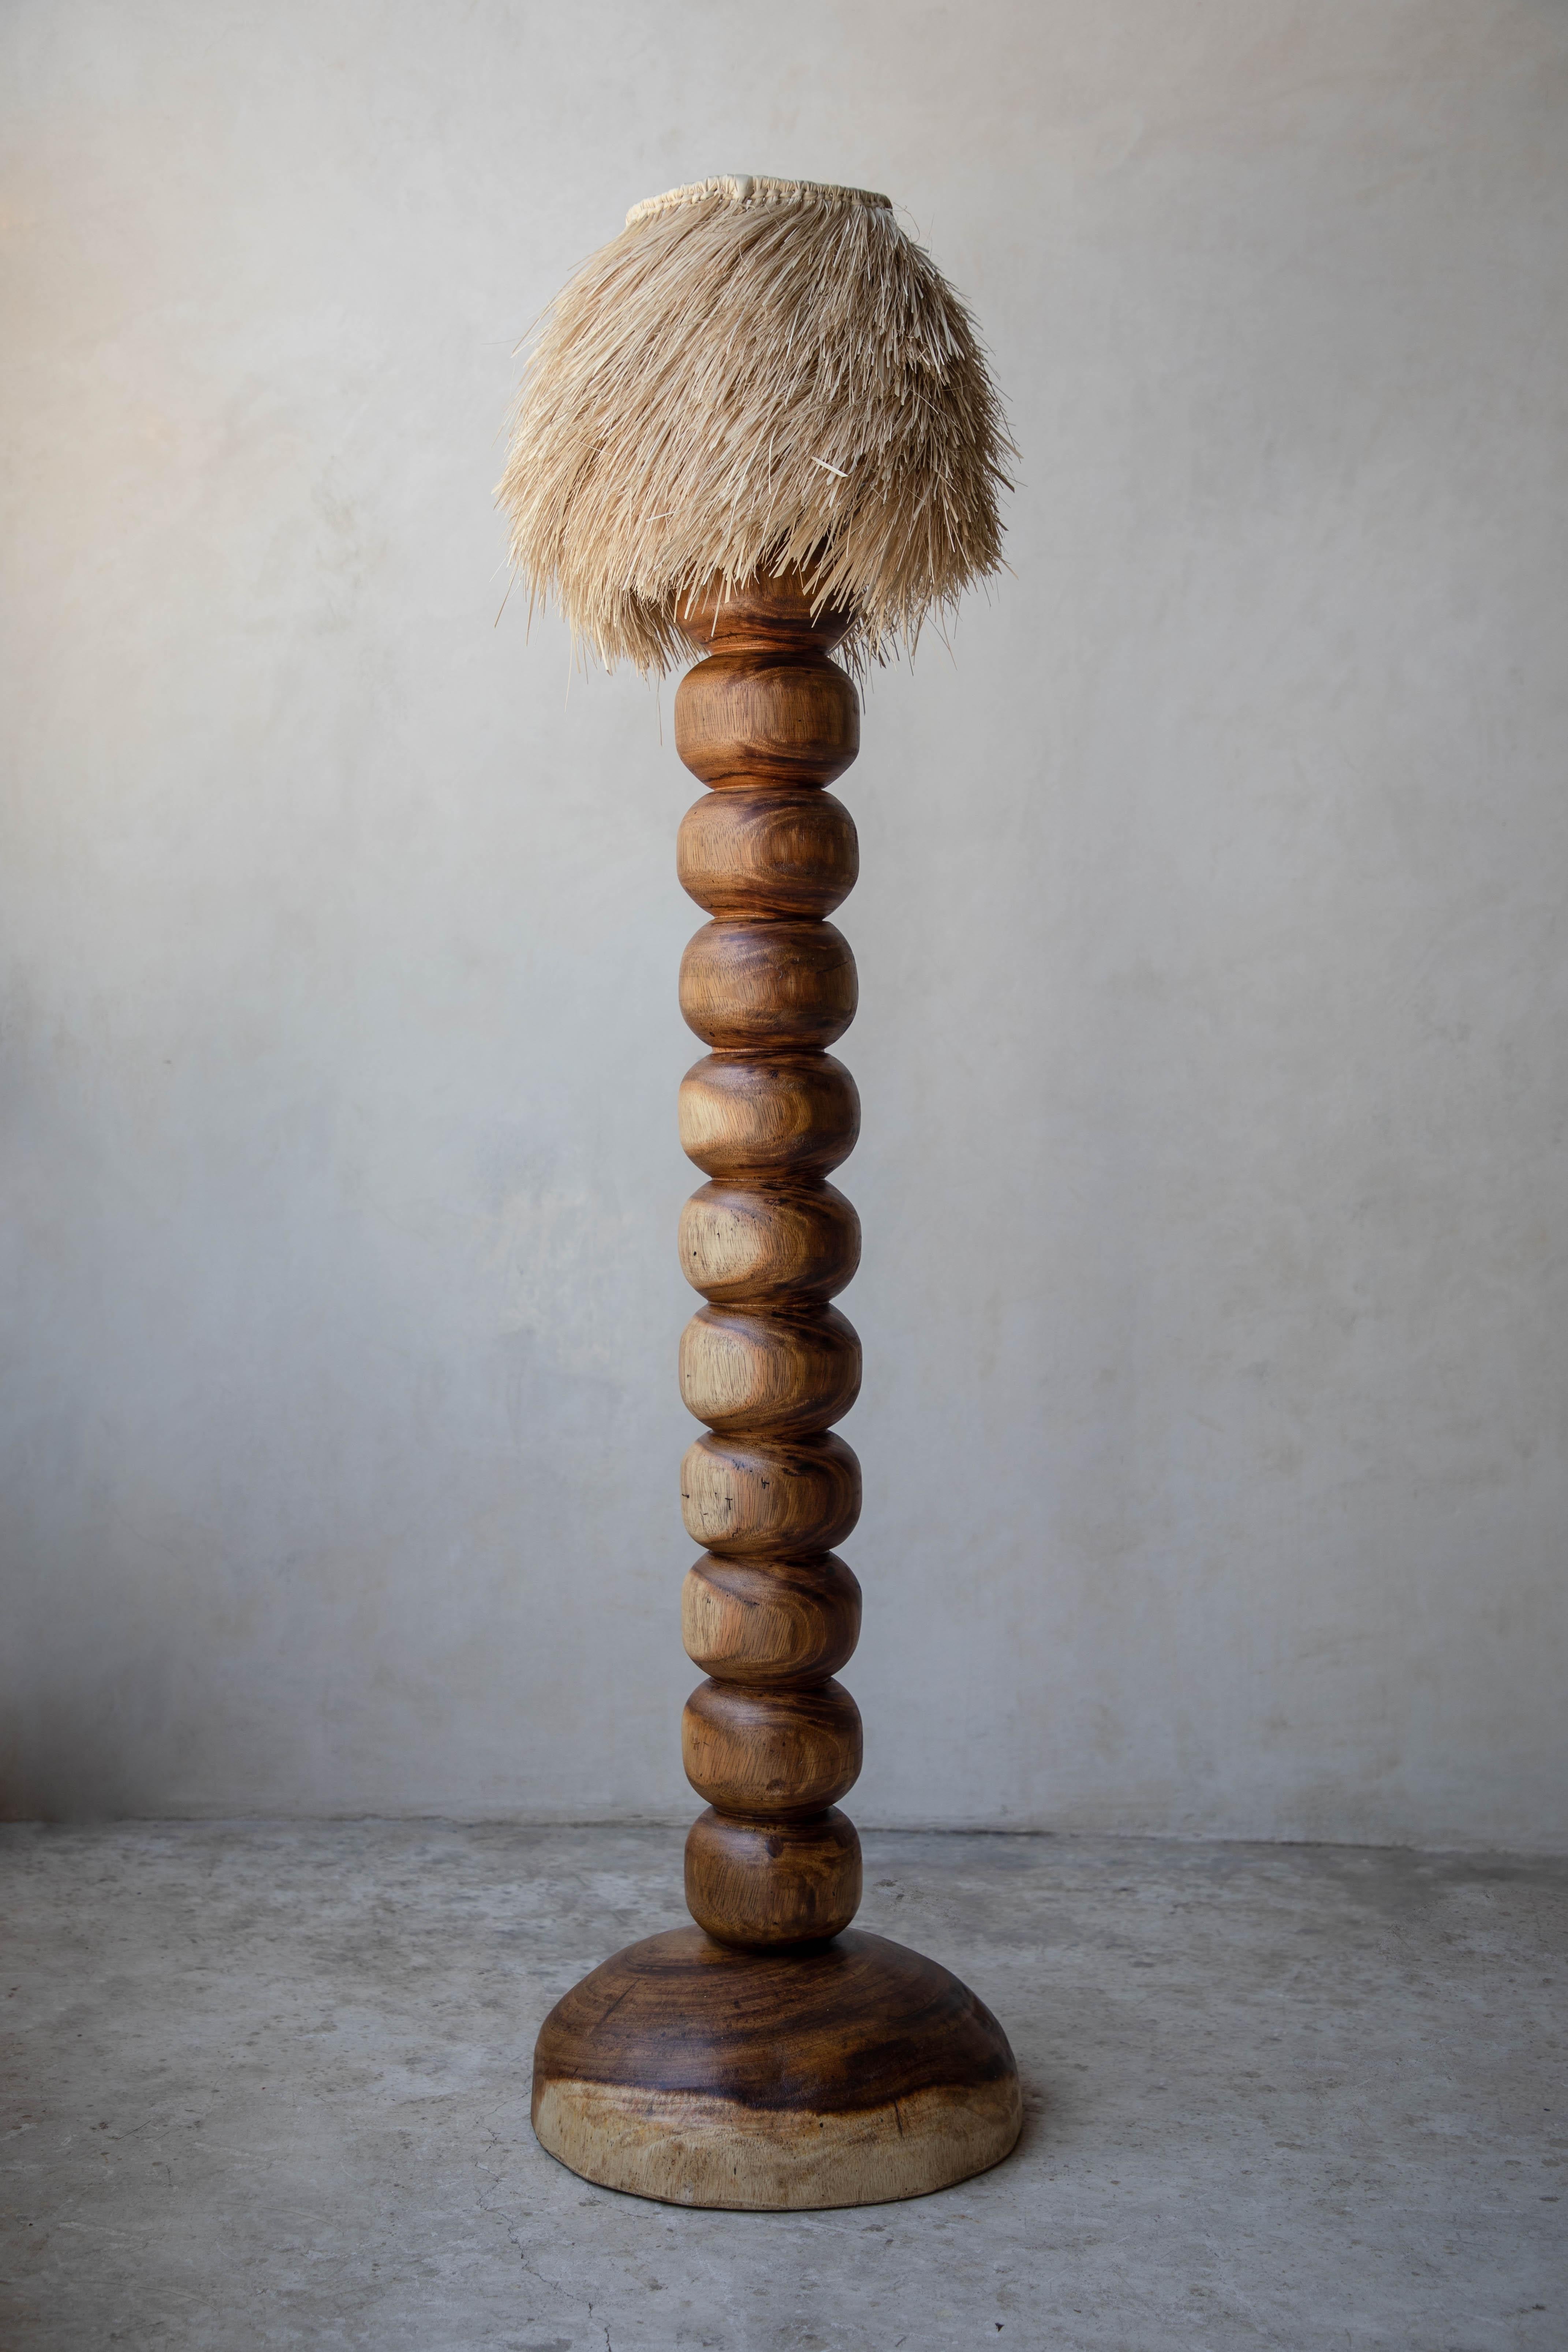 Natural jabin wood floor lamp with palm screen by Daniel Orozco
Material: Jabin wood.
Dimensions: D 39.9 x H 159.8 cm
Available in palm or linen lampshade and in natural or black wood finish.
Available in 2 sizes: D30 x H110, D40 x H160 cm.

Natural